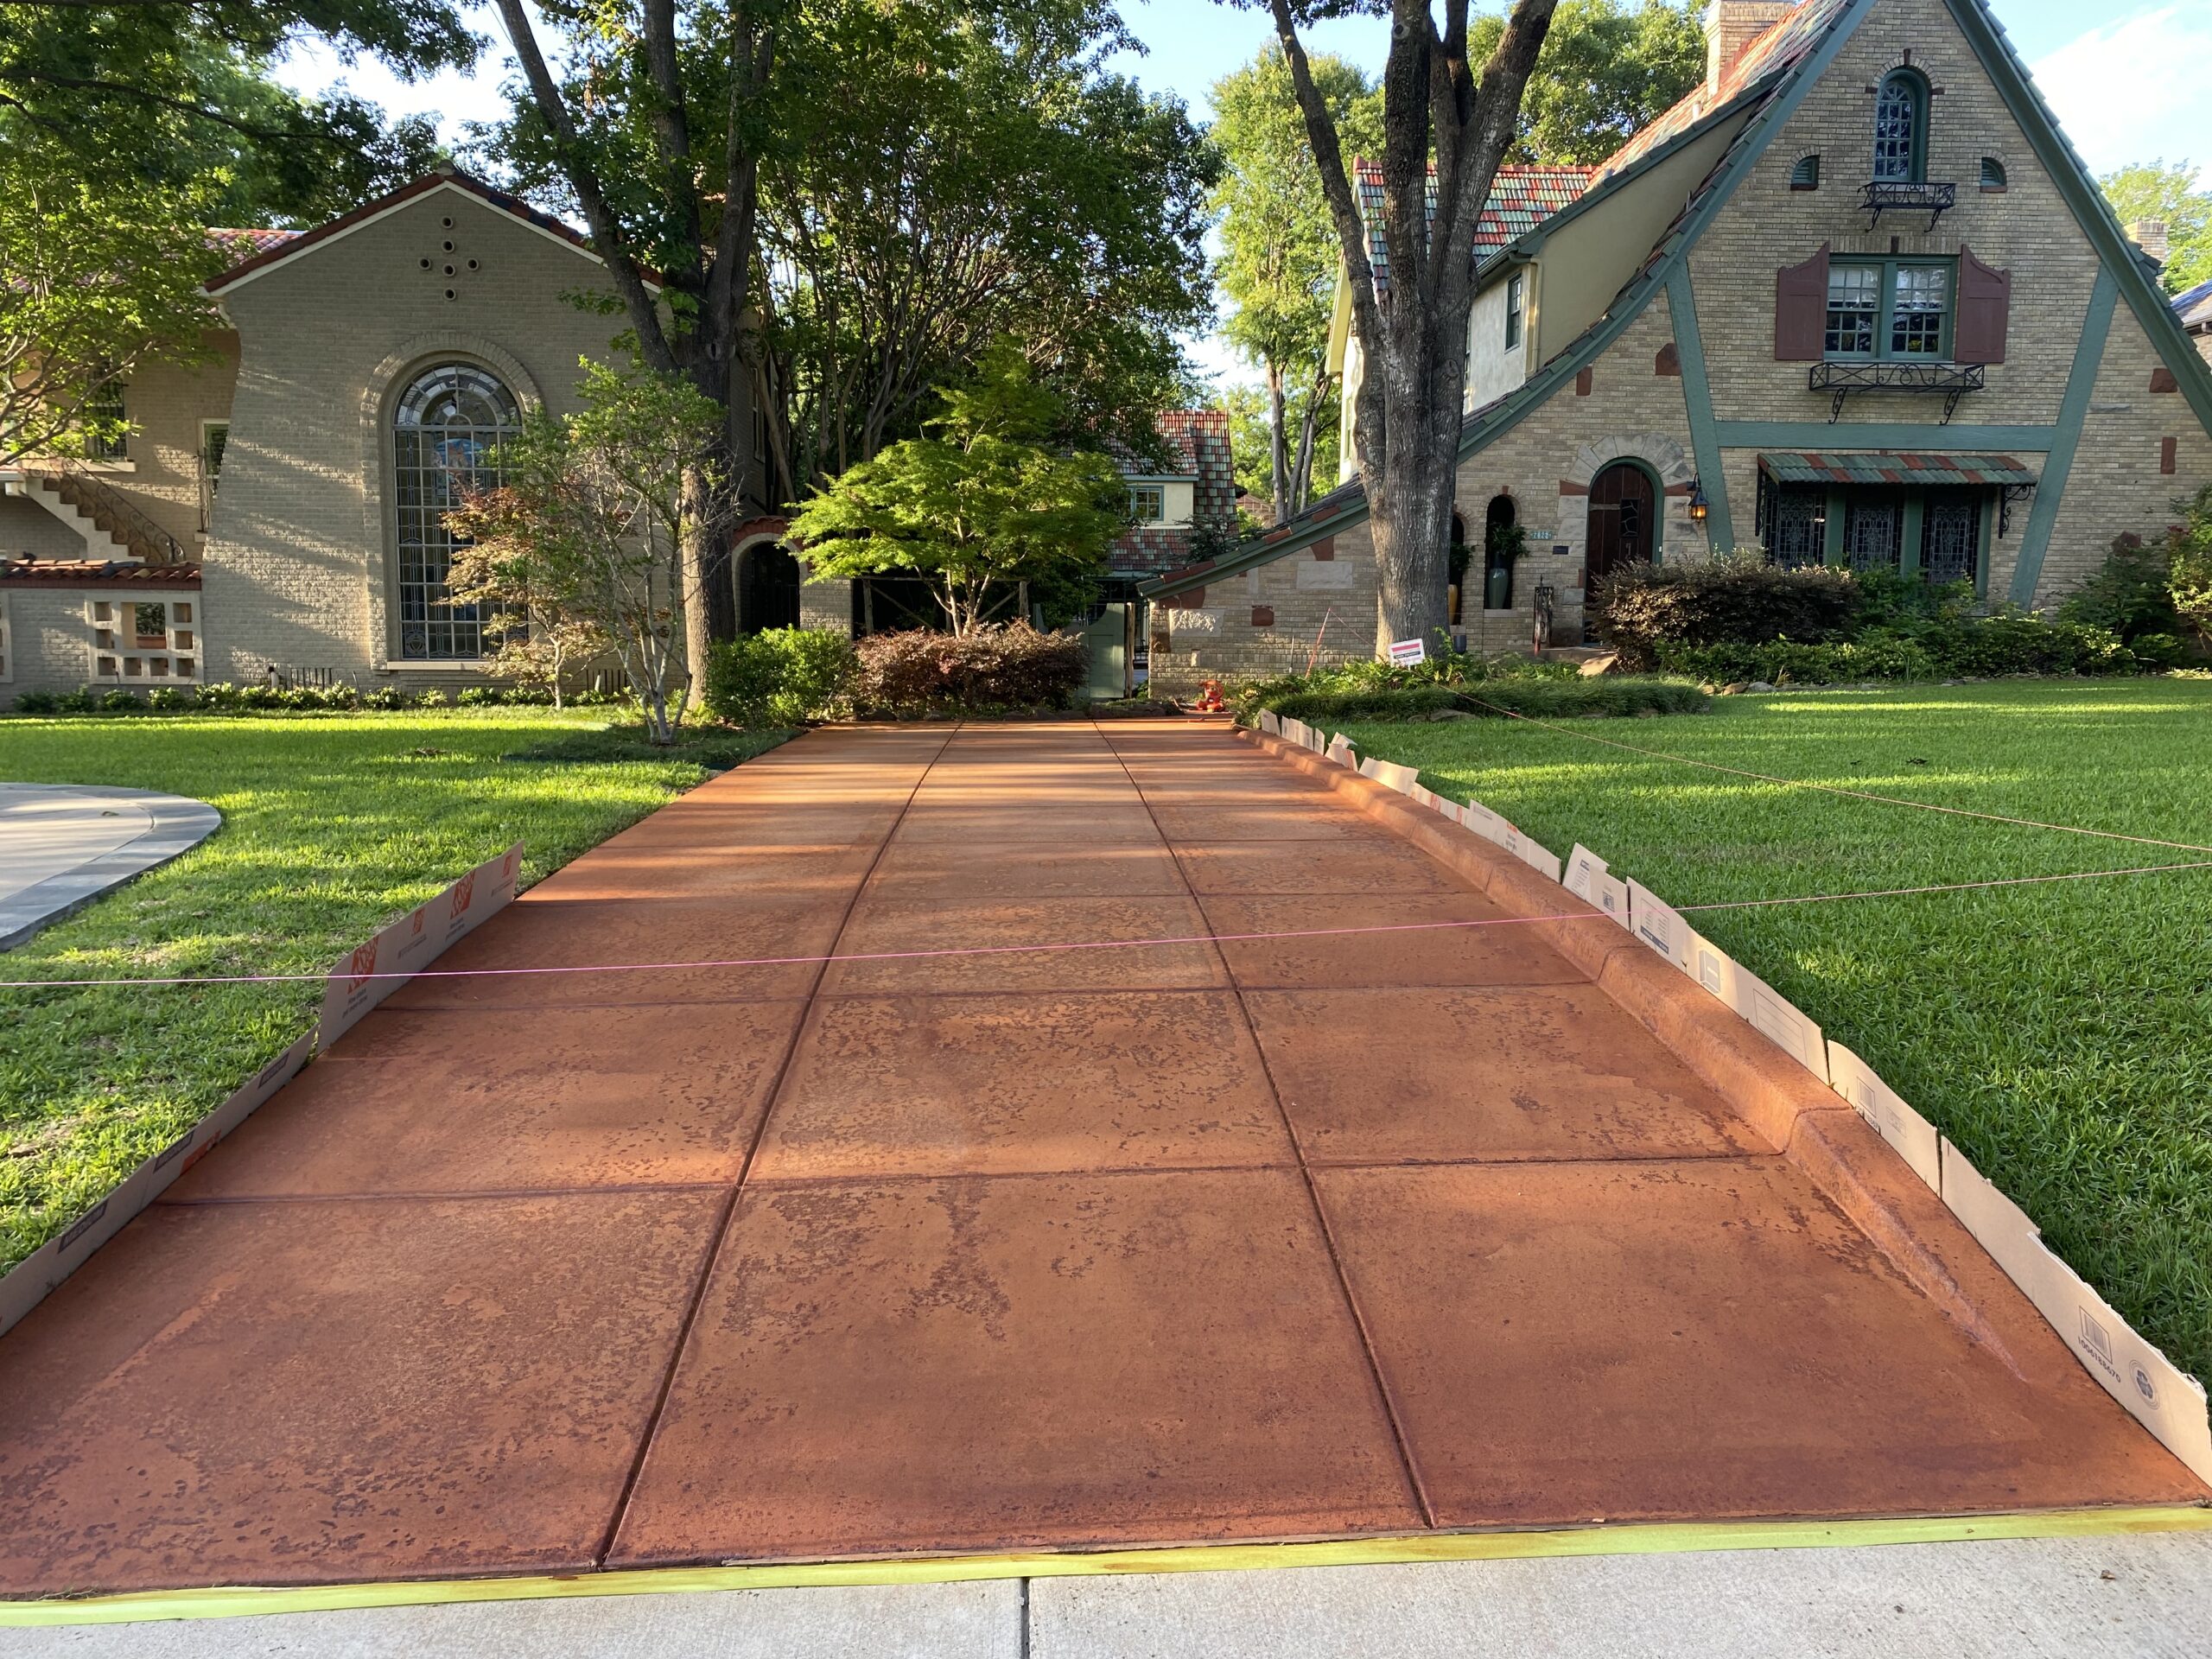 Revitalize your outdoor space with a pop of color! This scored concrete driveway was transformed with Tangerine ColorWave water-based stain, adding a touch of eco-friendly vibrancy